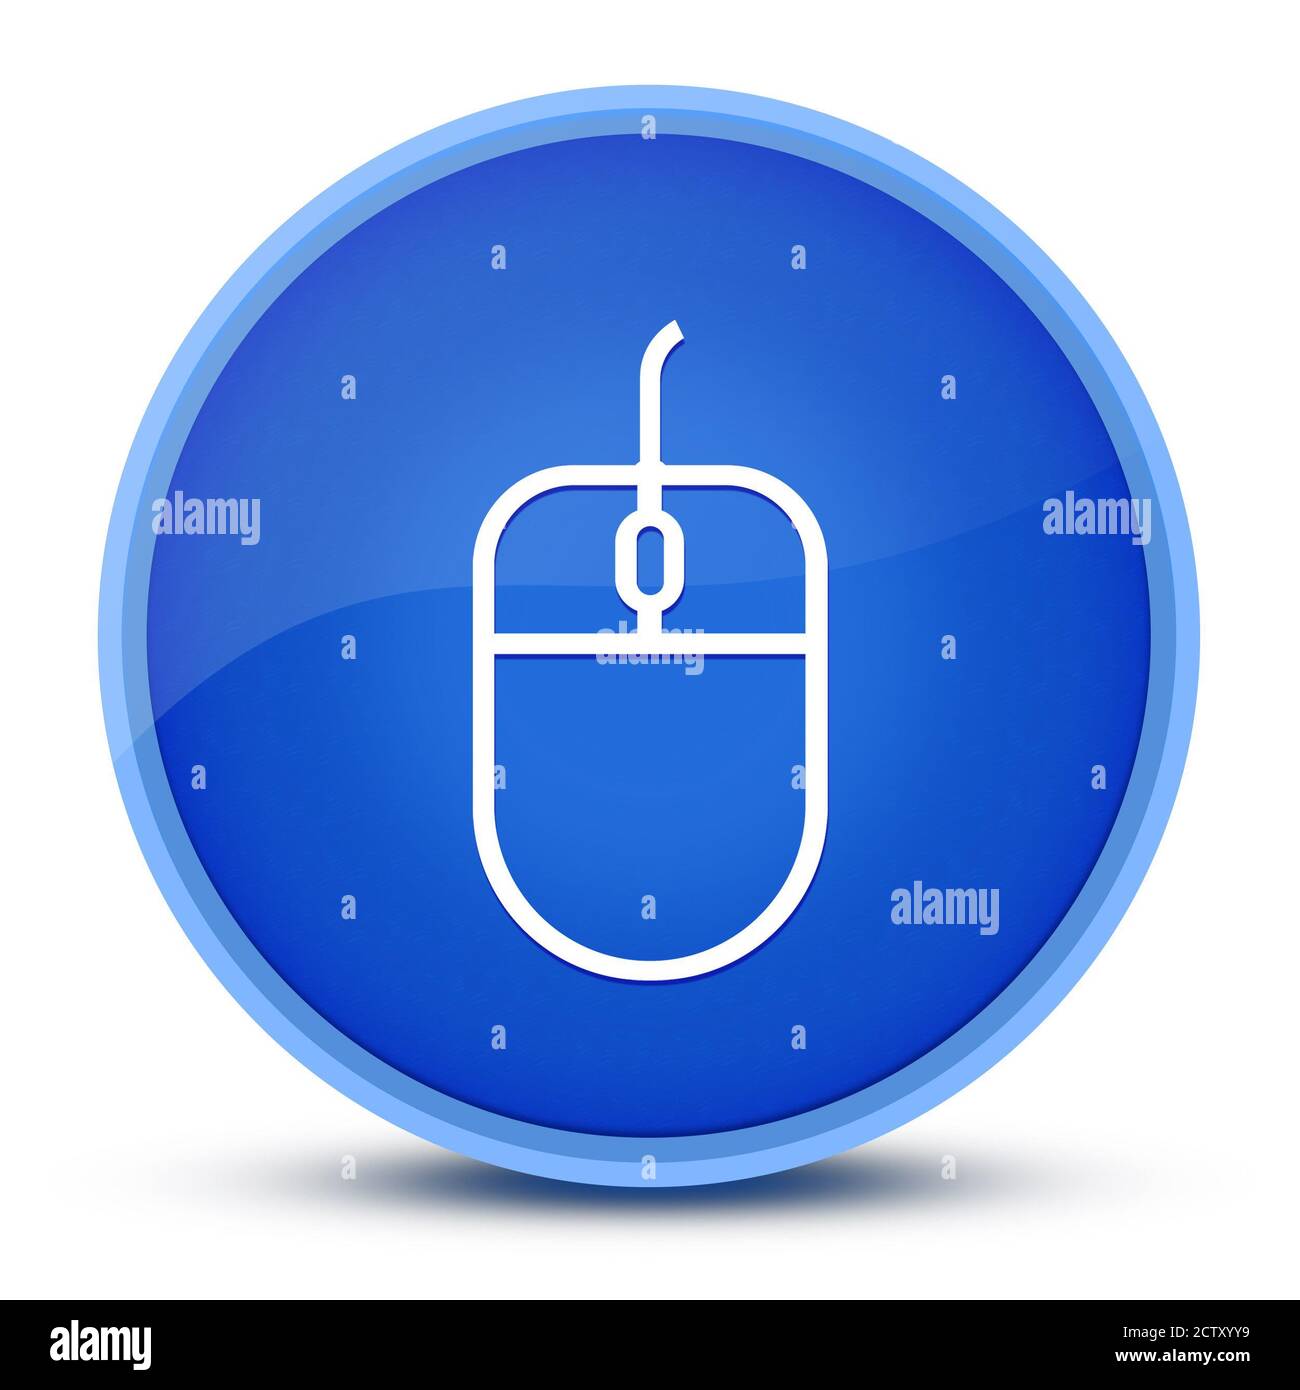 Mouse luxurious glossy blue round button abstract illustration Stock Photo